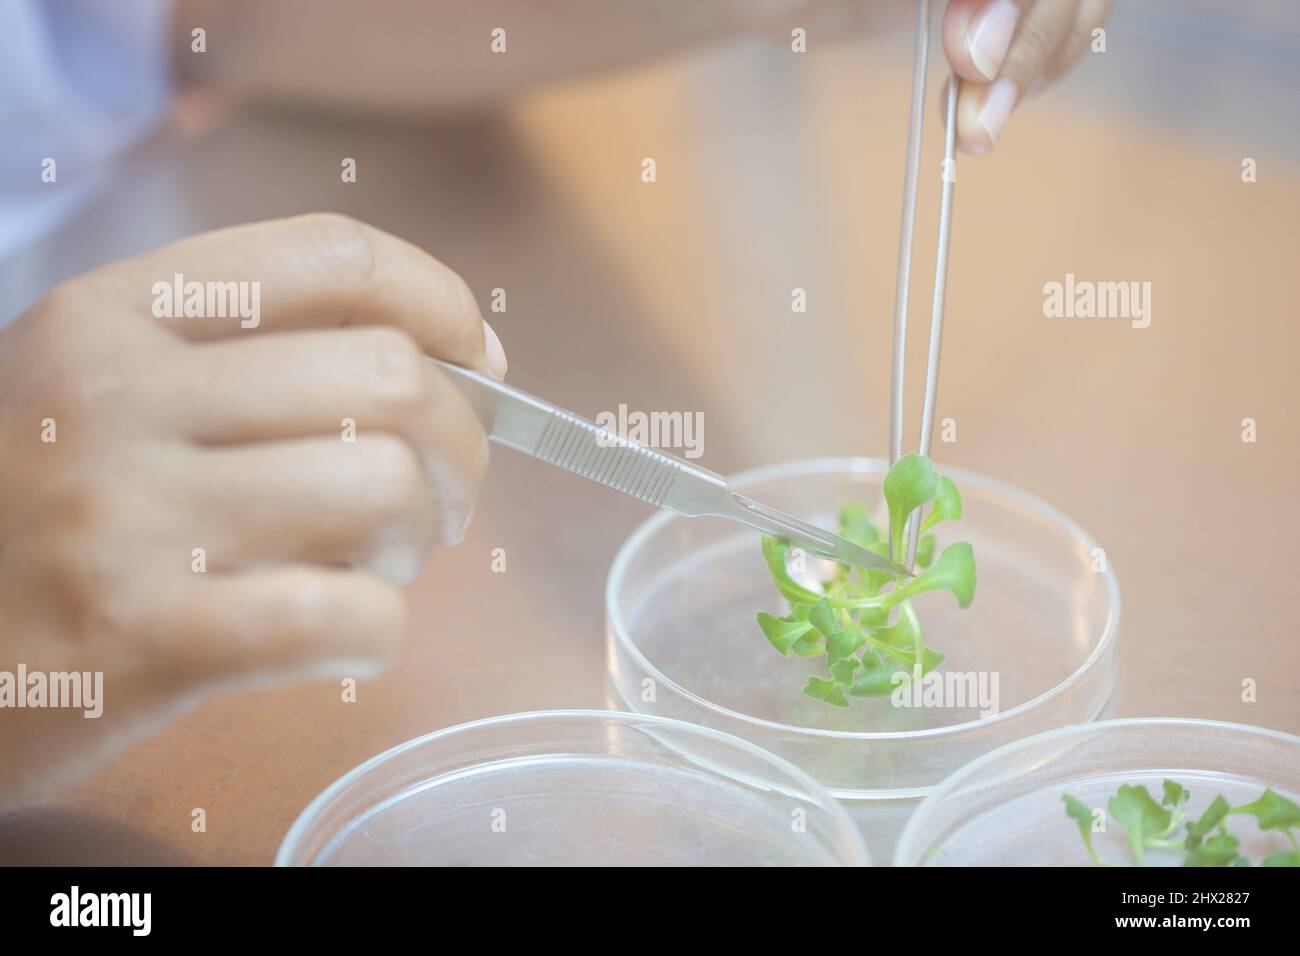 Scientists cut plant tissue culture in Petri dishes, performing laboratory experiments, plant testing. Asparagus and other tropical plants. Stock Photo